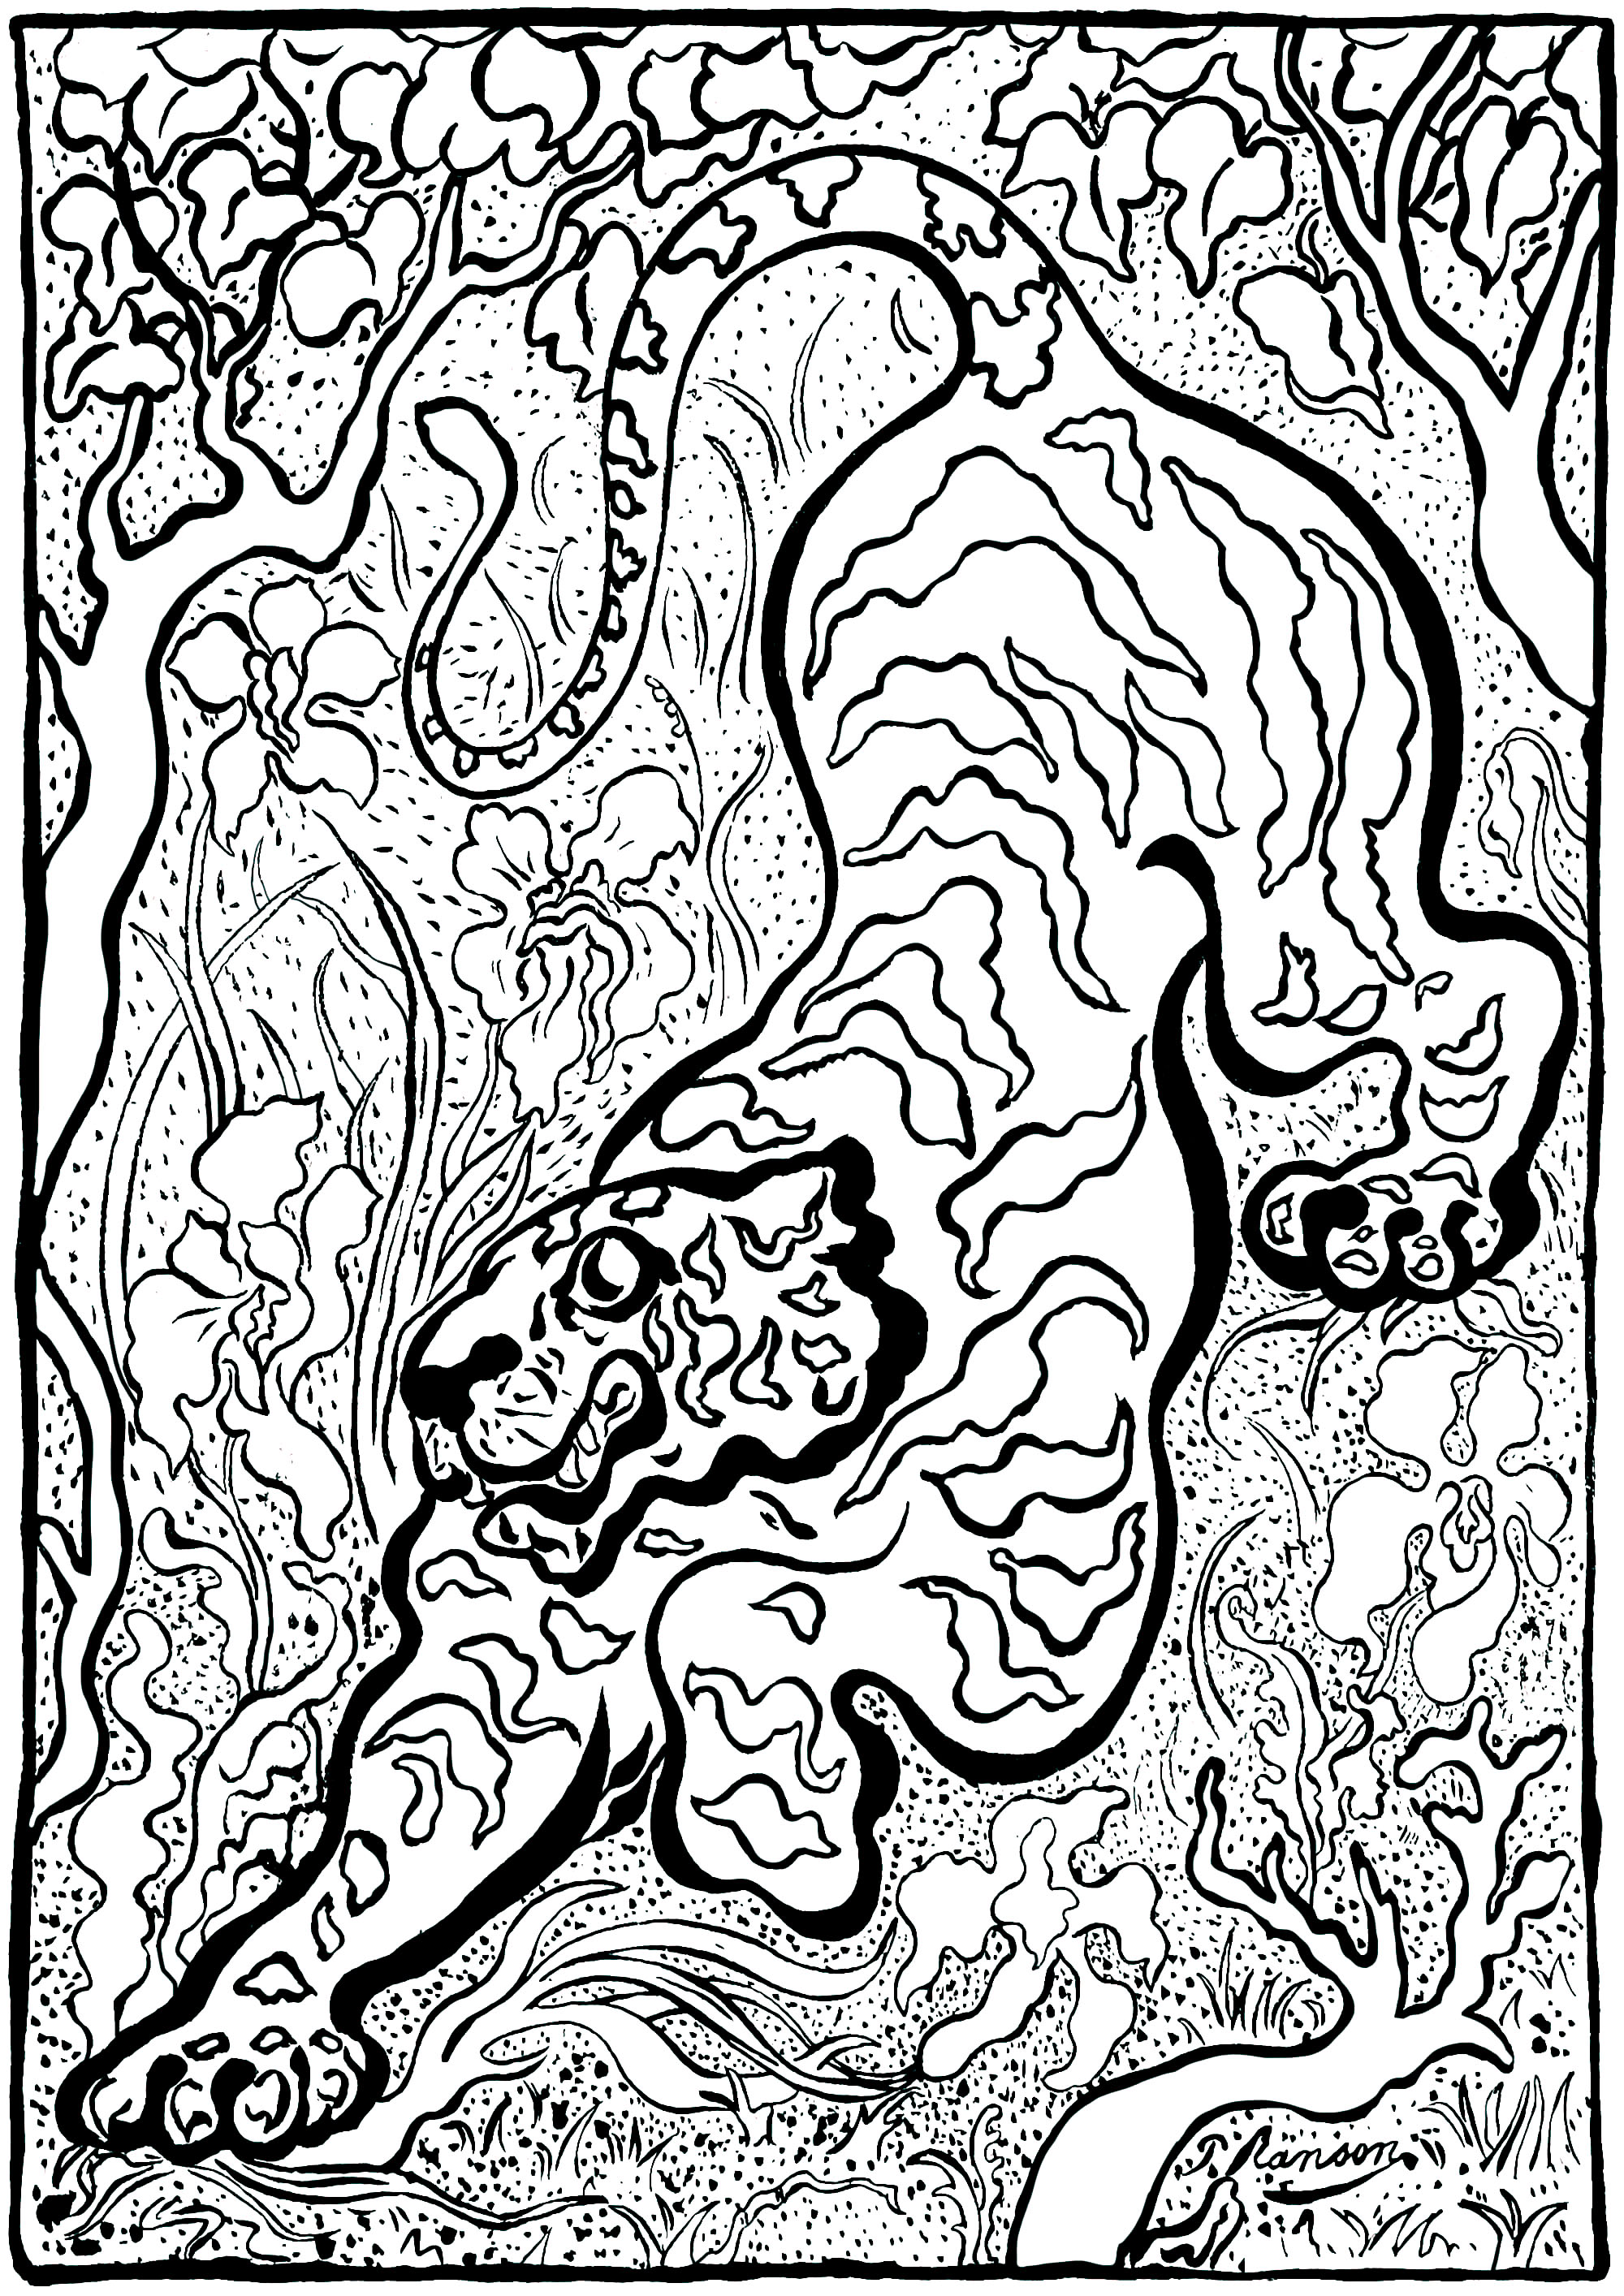 Coloring page created from Paul-Élie Ranson's artwork 'Tiger in the Jungle' (1883) - Version 1 (simple). Paul-Élie Ranson, who belongs to 'Les Nabis' group, has developed an original style with symbolist and esoteric resonances.Inscribed in the history of post-impressionism but breaking with impressionism, the nabi movement advocates a return to the imagination and subjectivity.